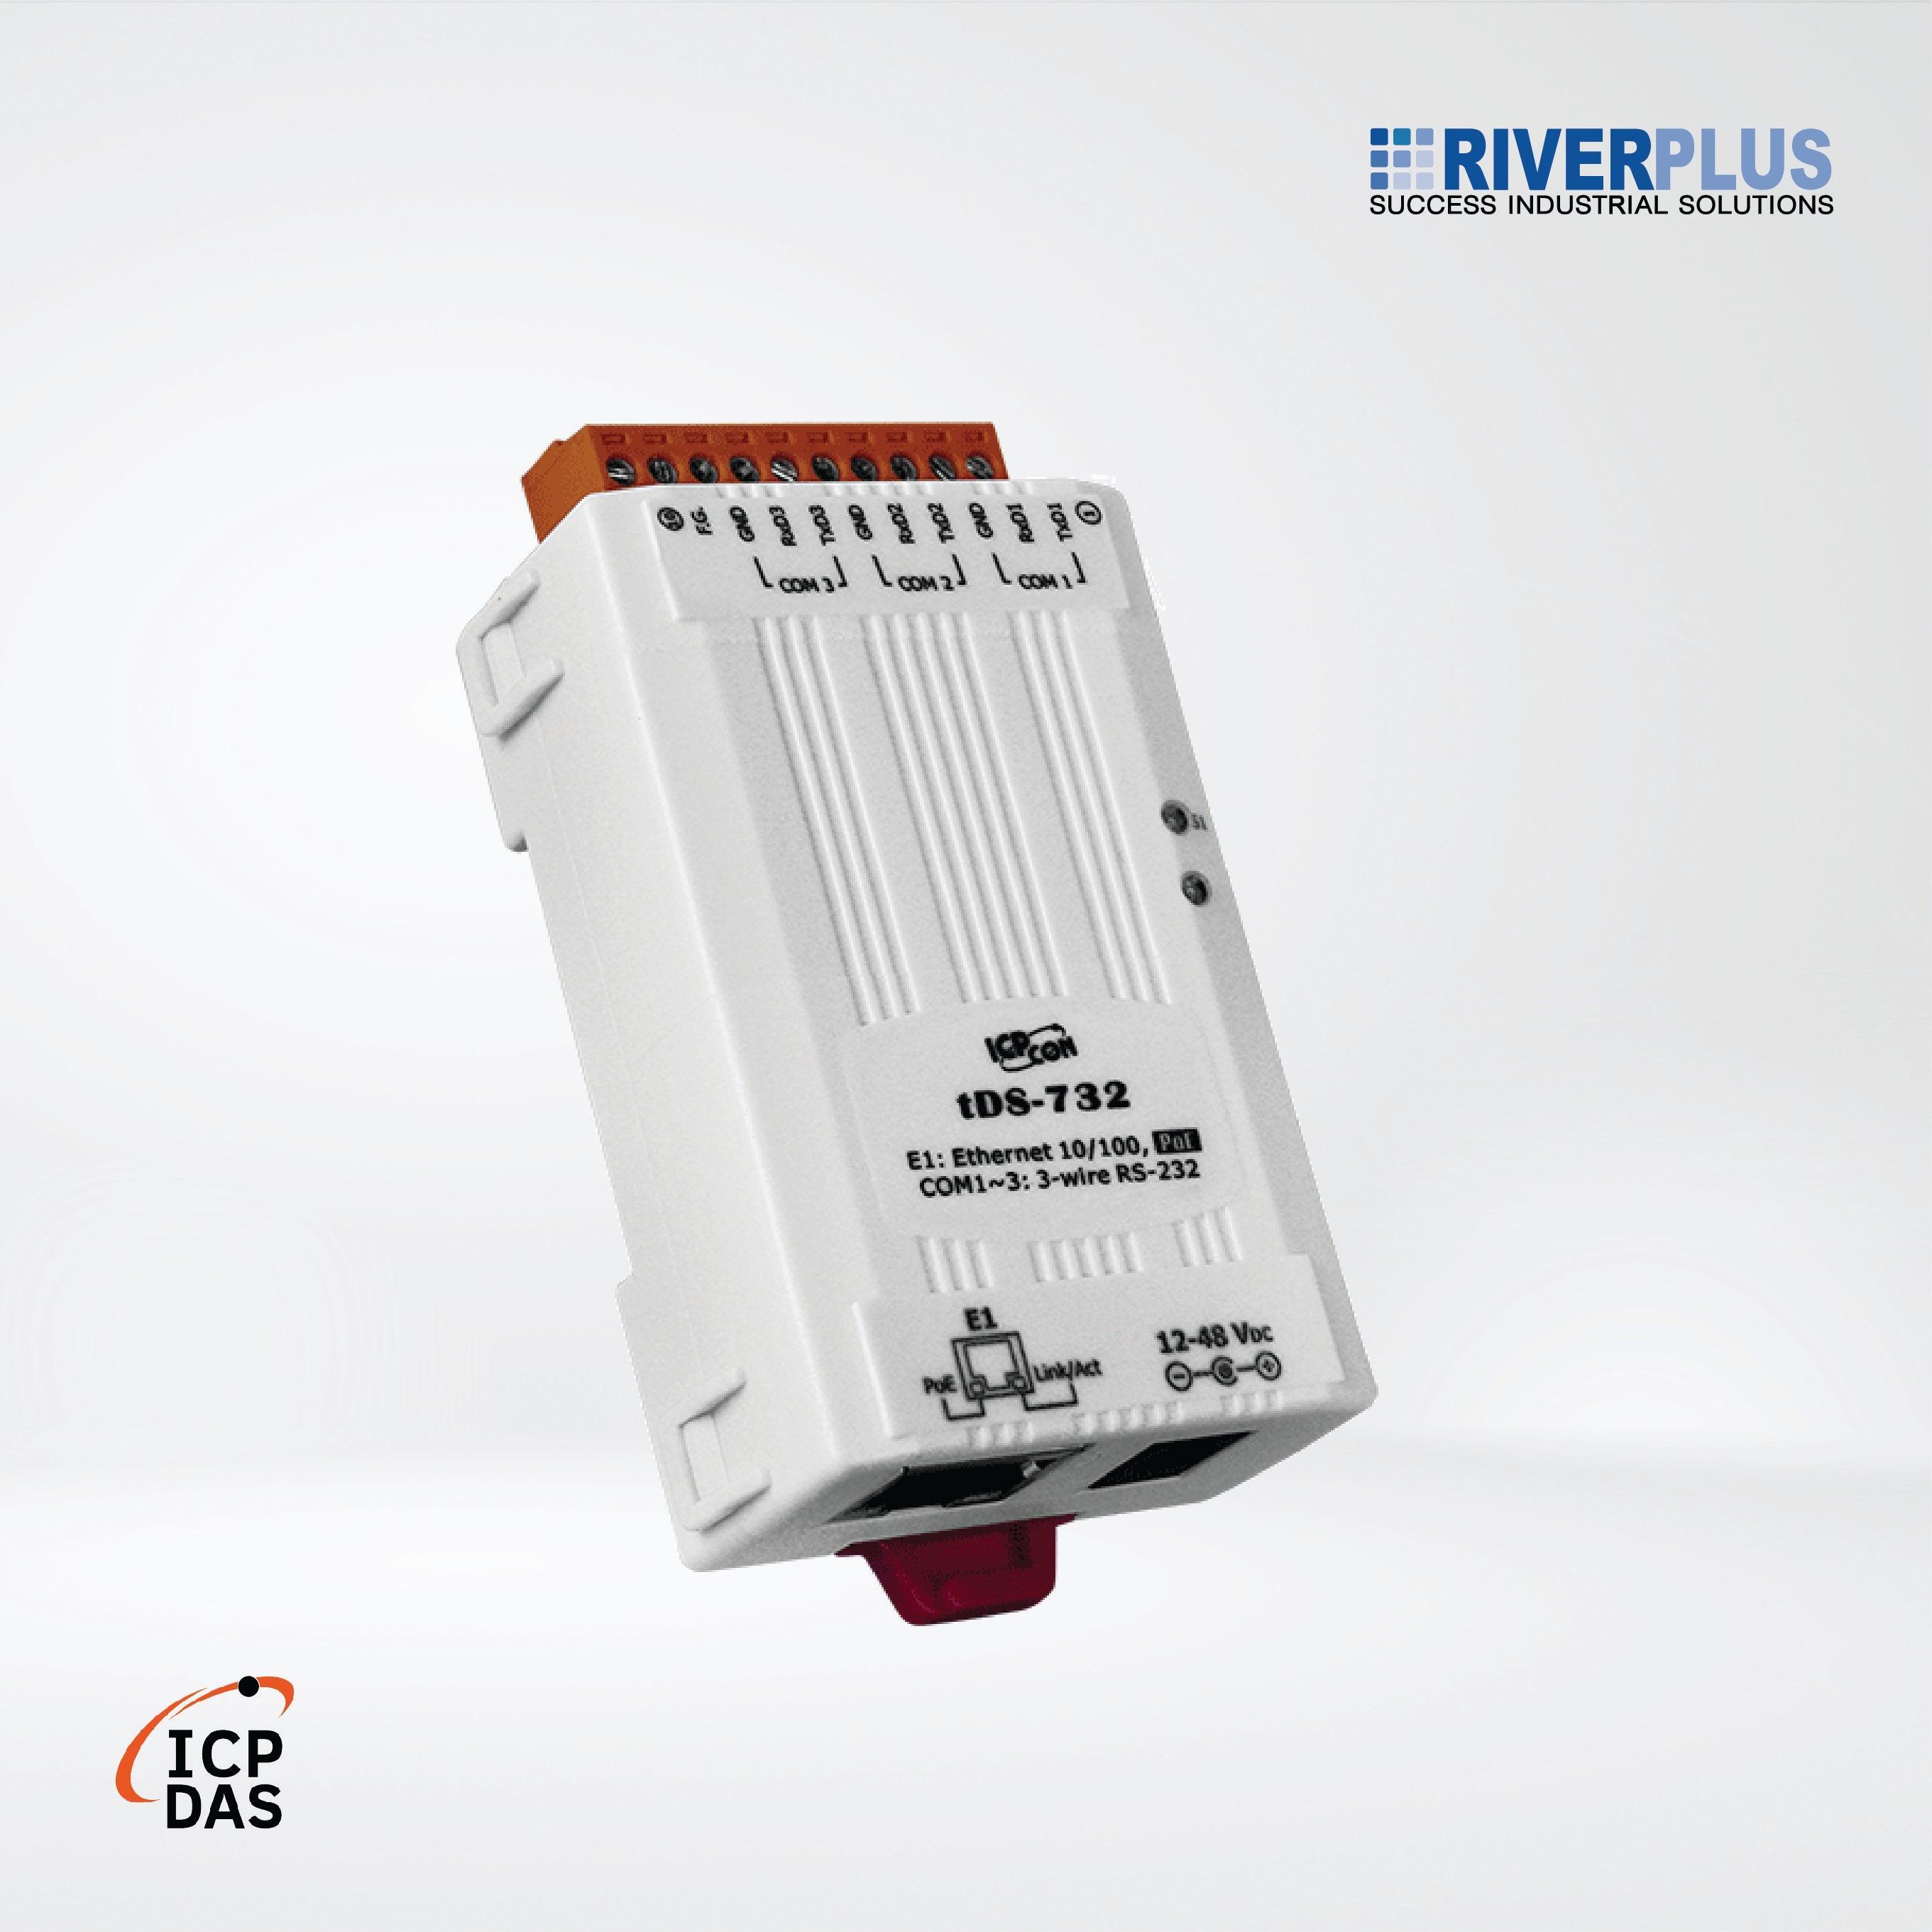 tDS-732 CR Tiny (3x RS-232) Serial-to-Ethernet Device Server - Riverplus